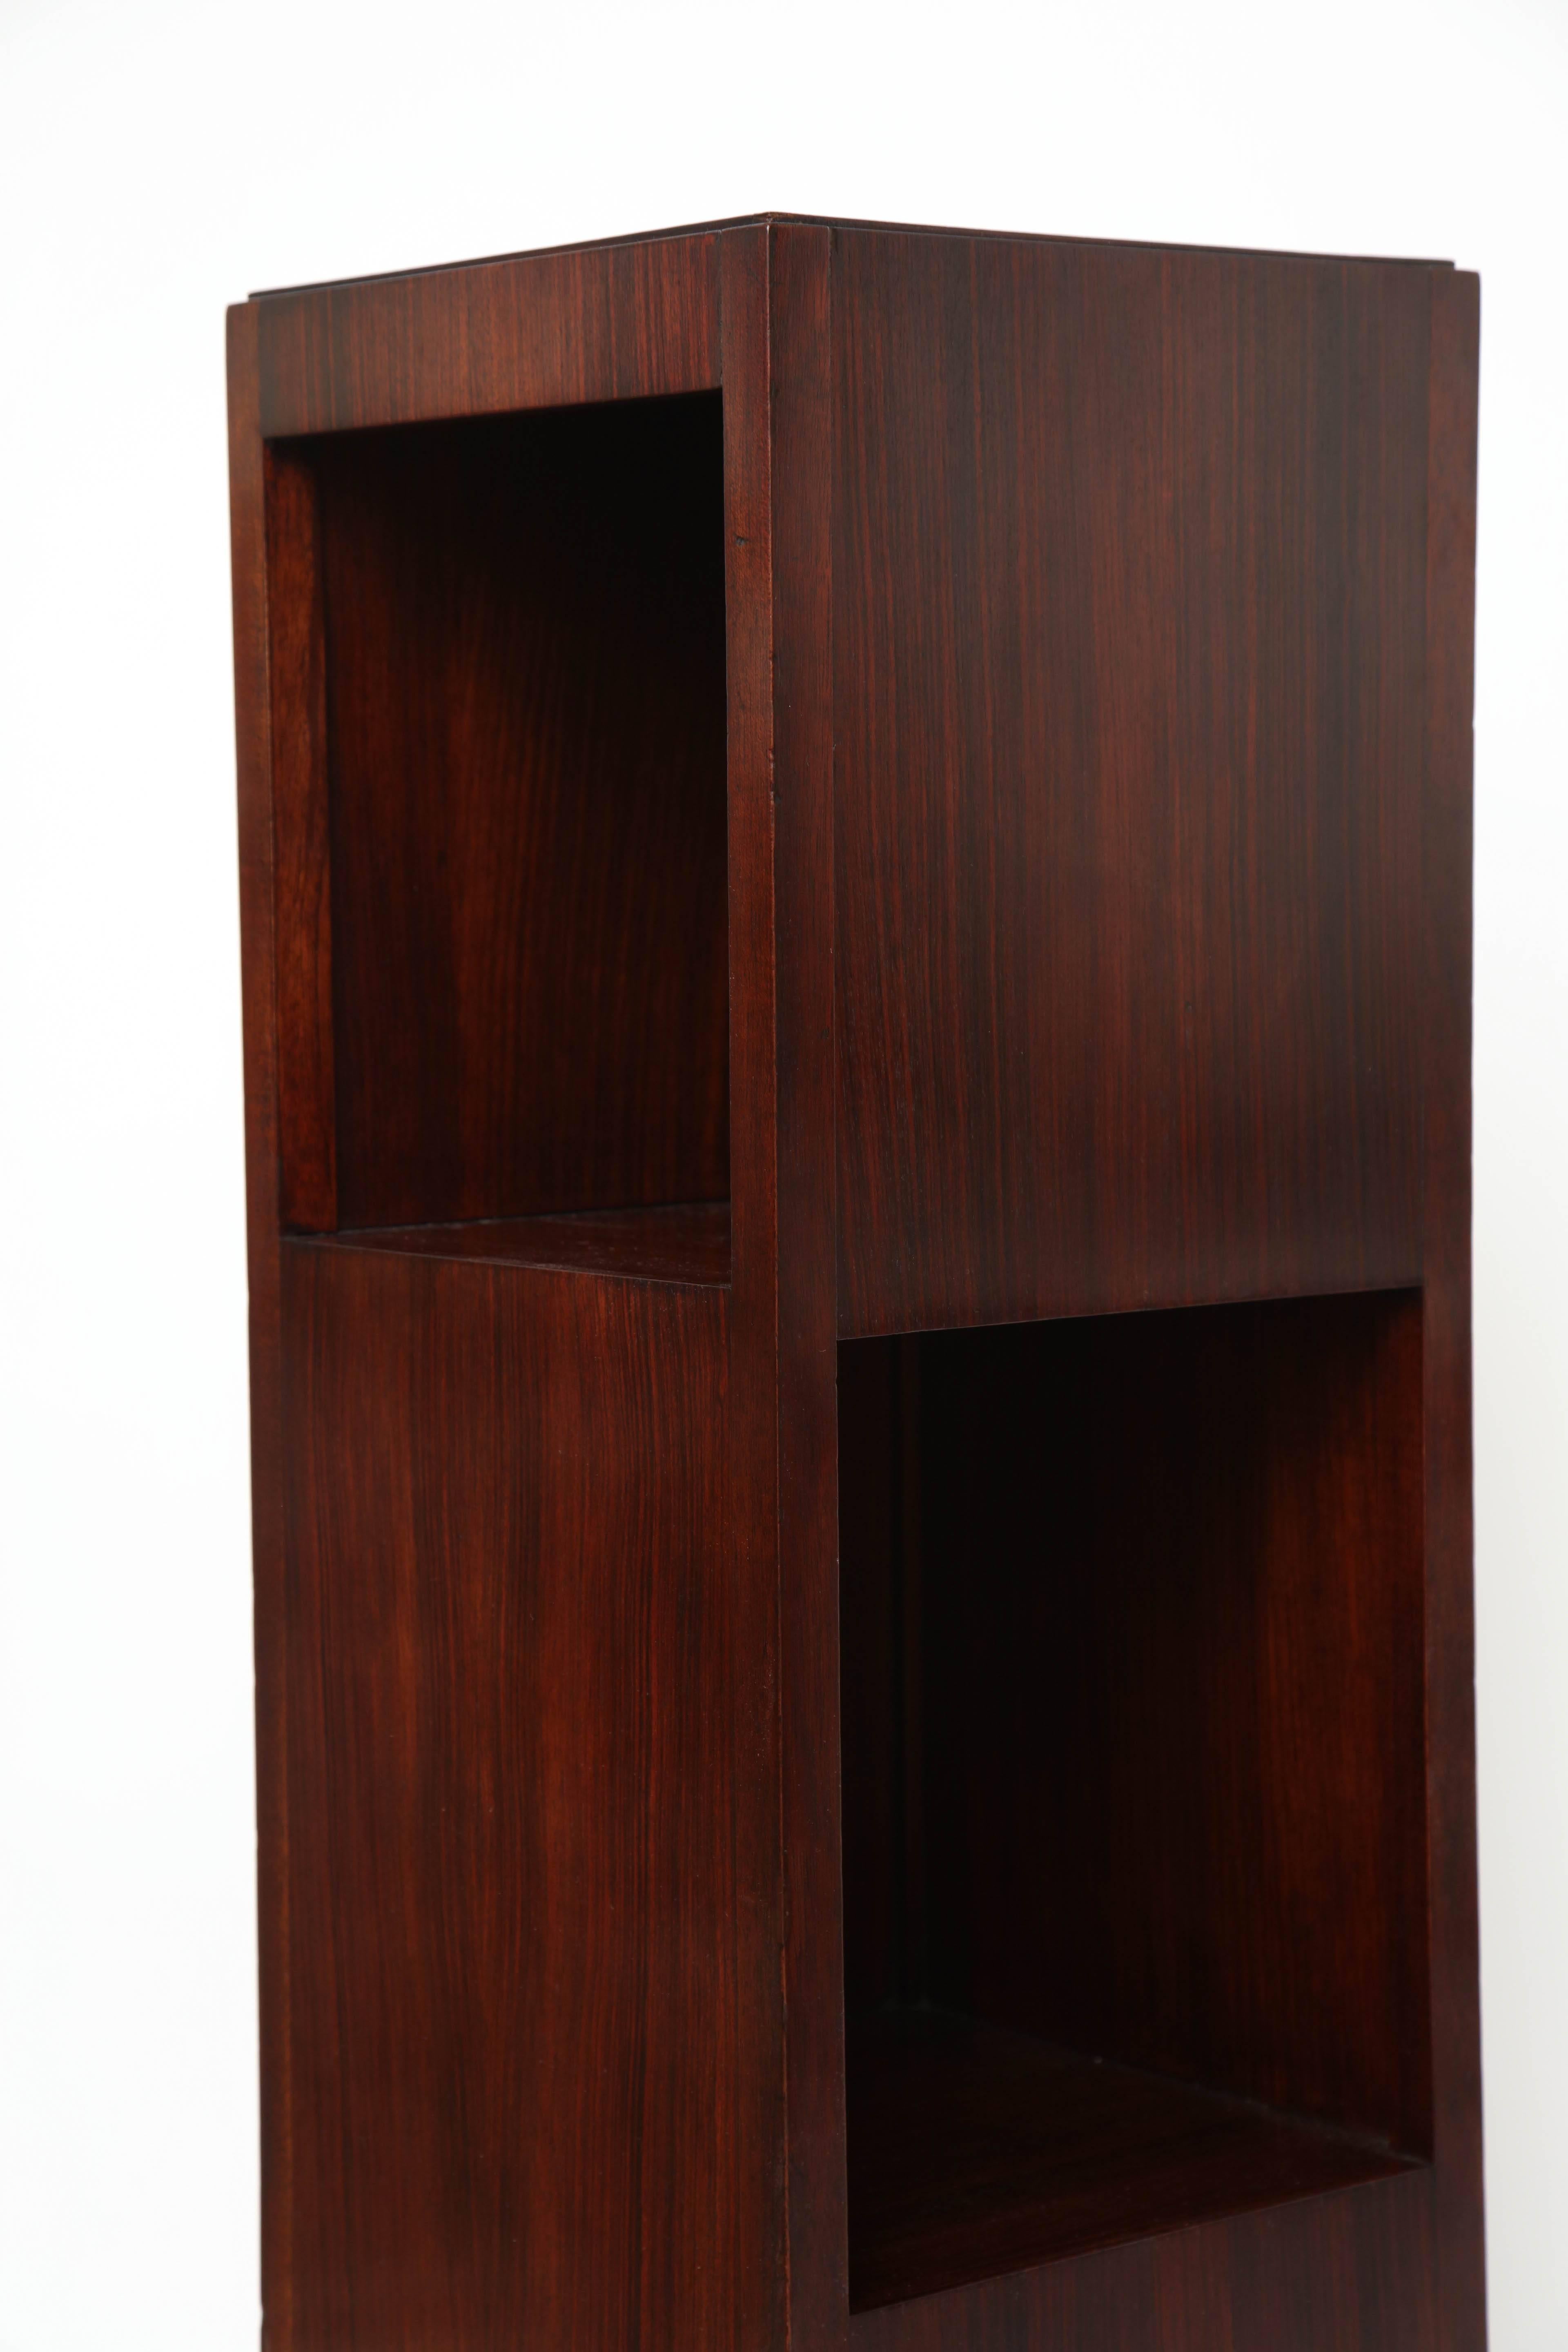 Unusual French Art Deco rosewood pedestal bookcase. Two faces with offset openings.